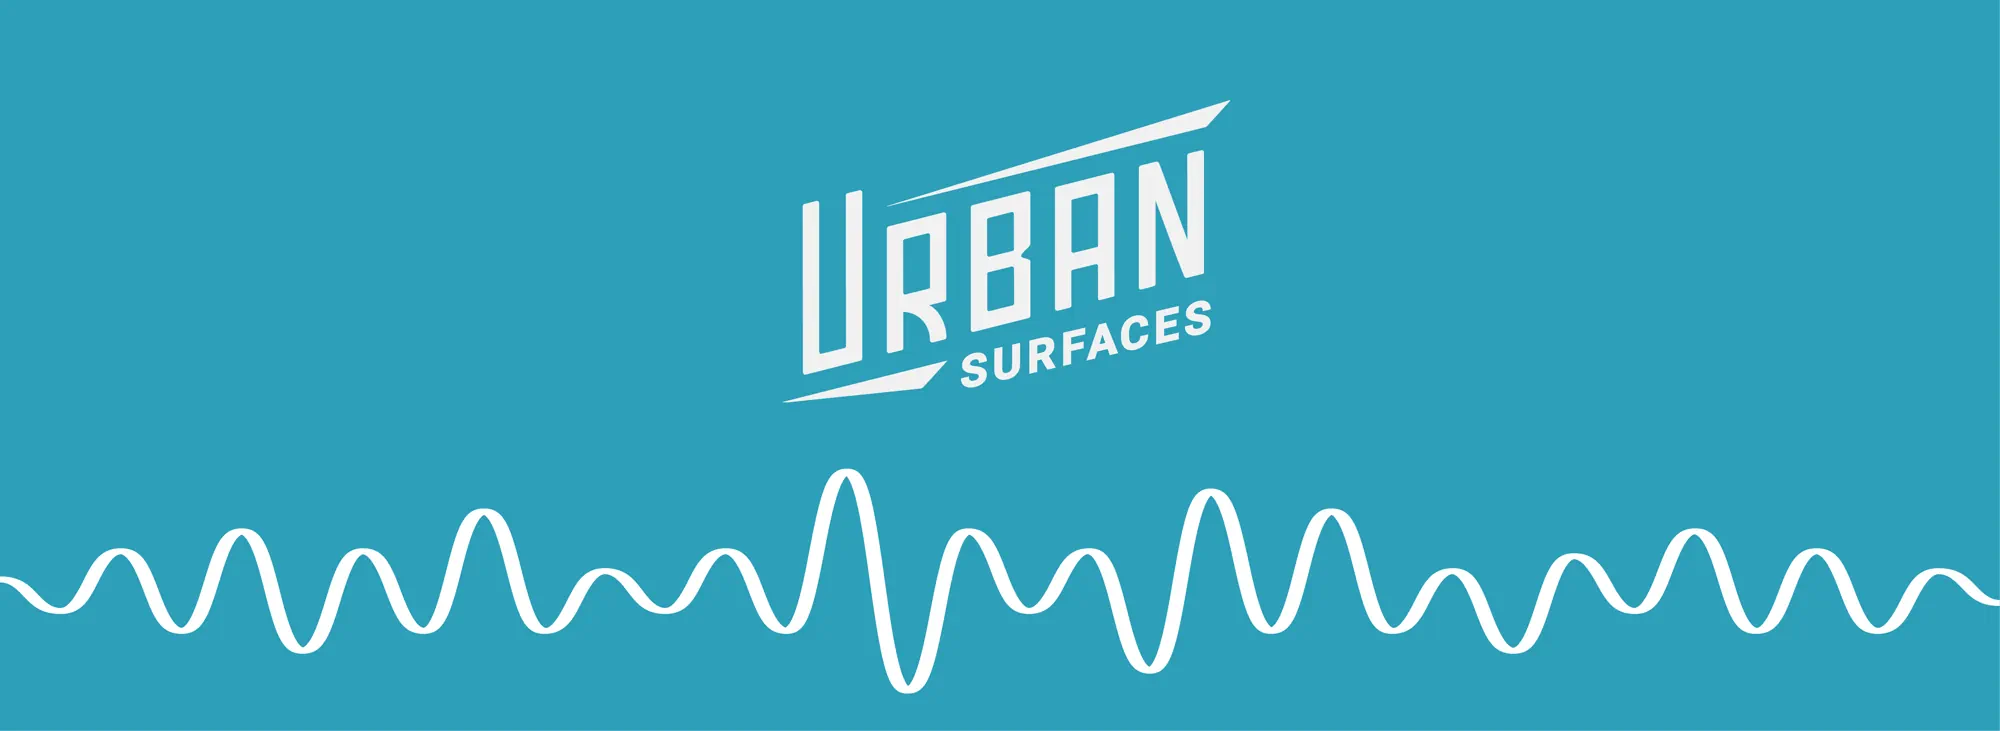 Urban Surfaces logo with sound waves below.